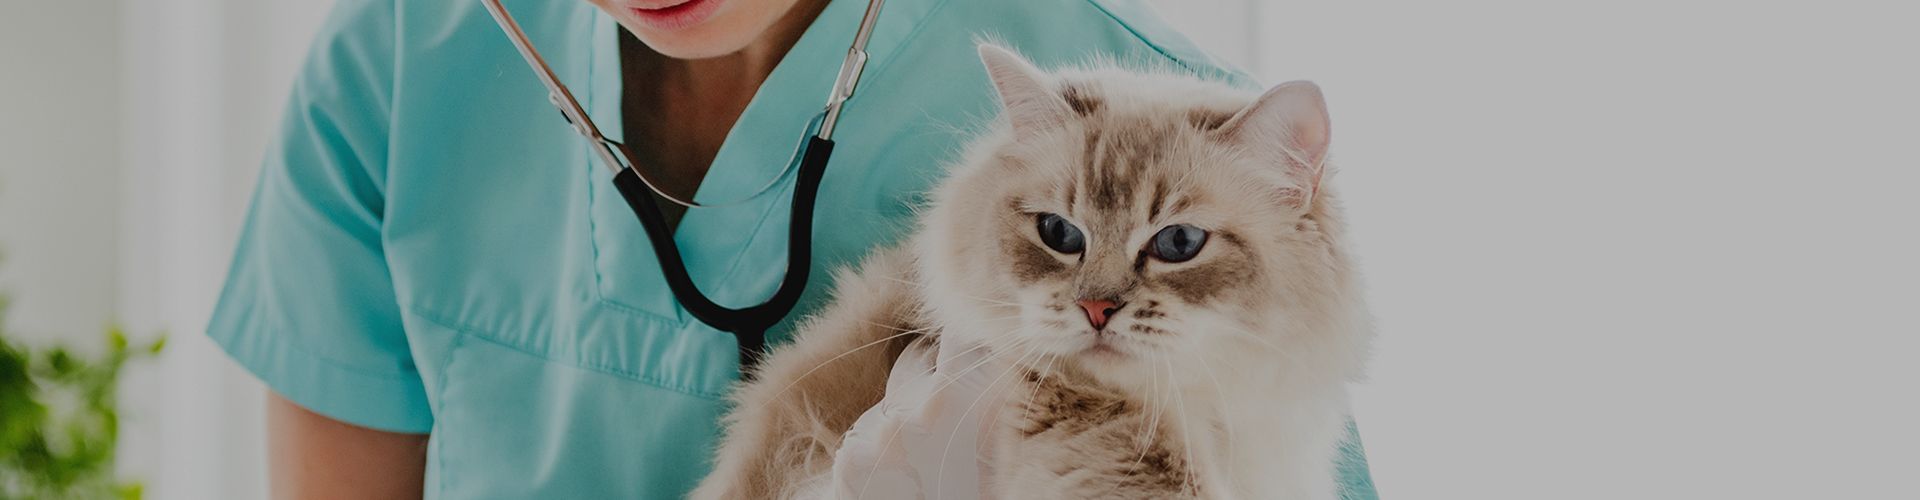 woman veterinarian holding fluffy ragdoll cat examining it during medical care